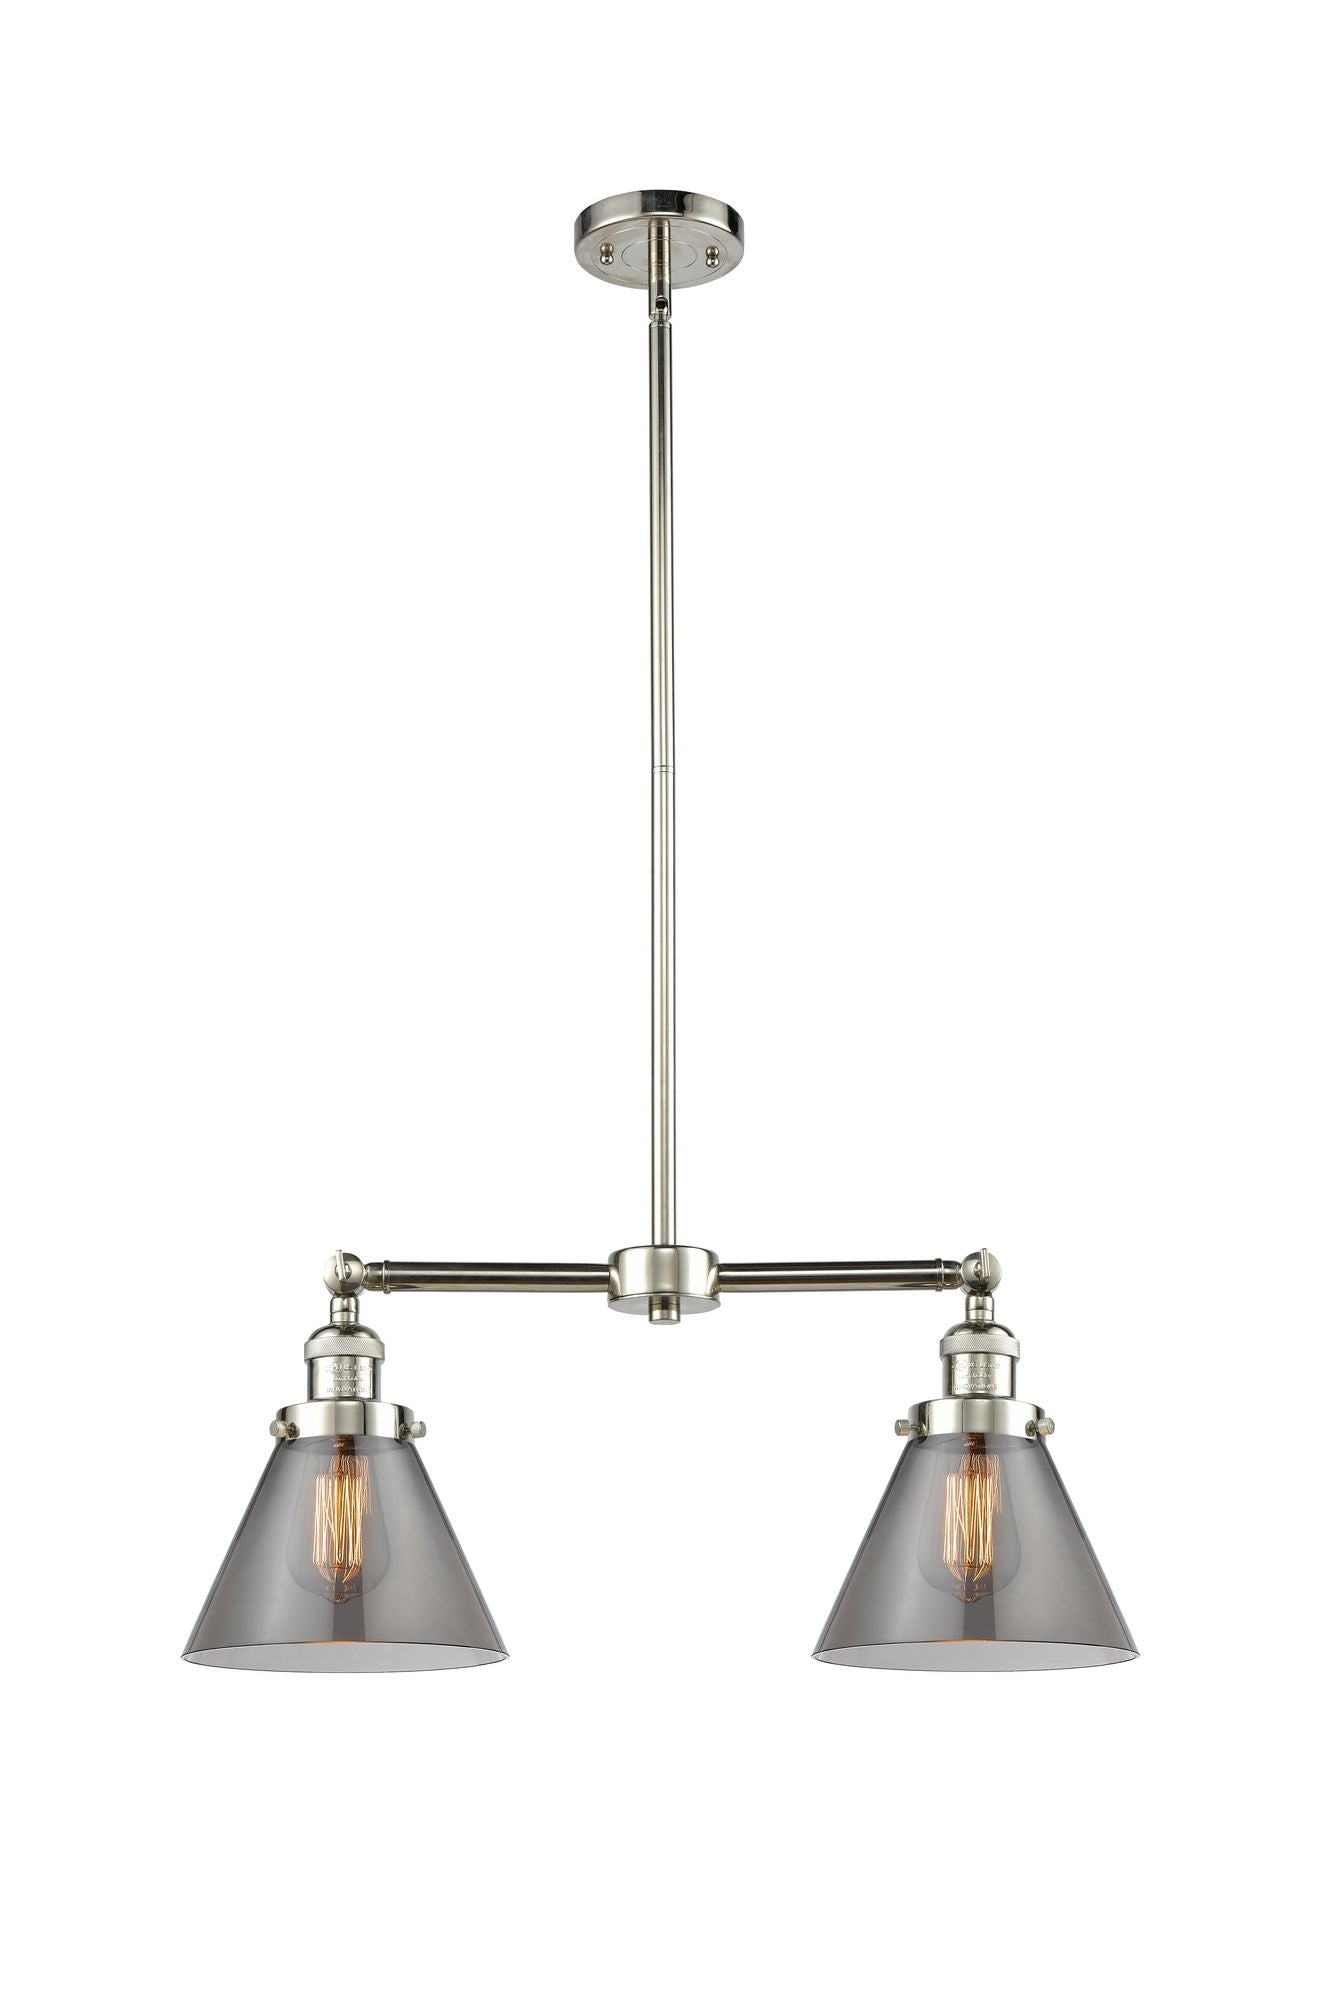 209-PN-G43-L 2-Light 21" Polished Nickel Island Light - Plated Smoke Cone 12" Glass - LED Bulb - Dimmensions: 21 x 5 x 10<br>Minimum Height : 25.125<br>Maximum Height : 49.125 - Sloped Ceiling Compatible: Yes